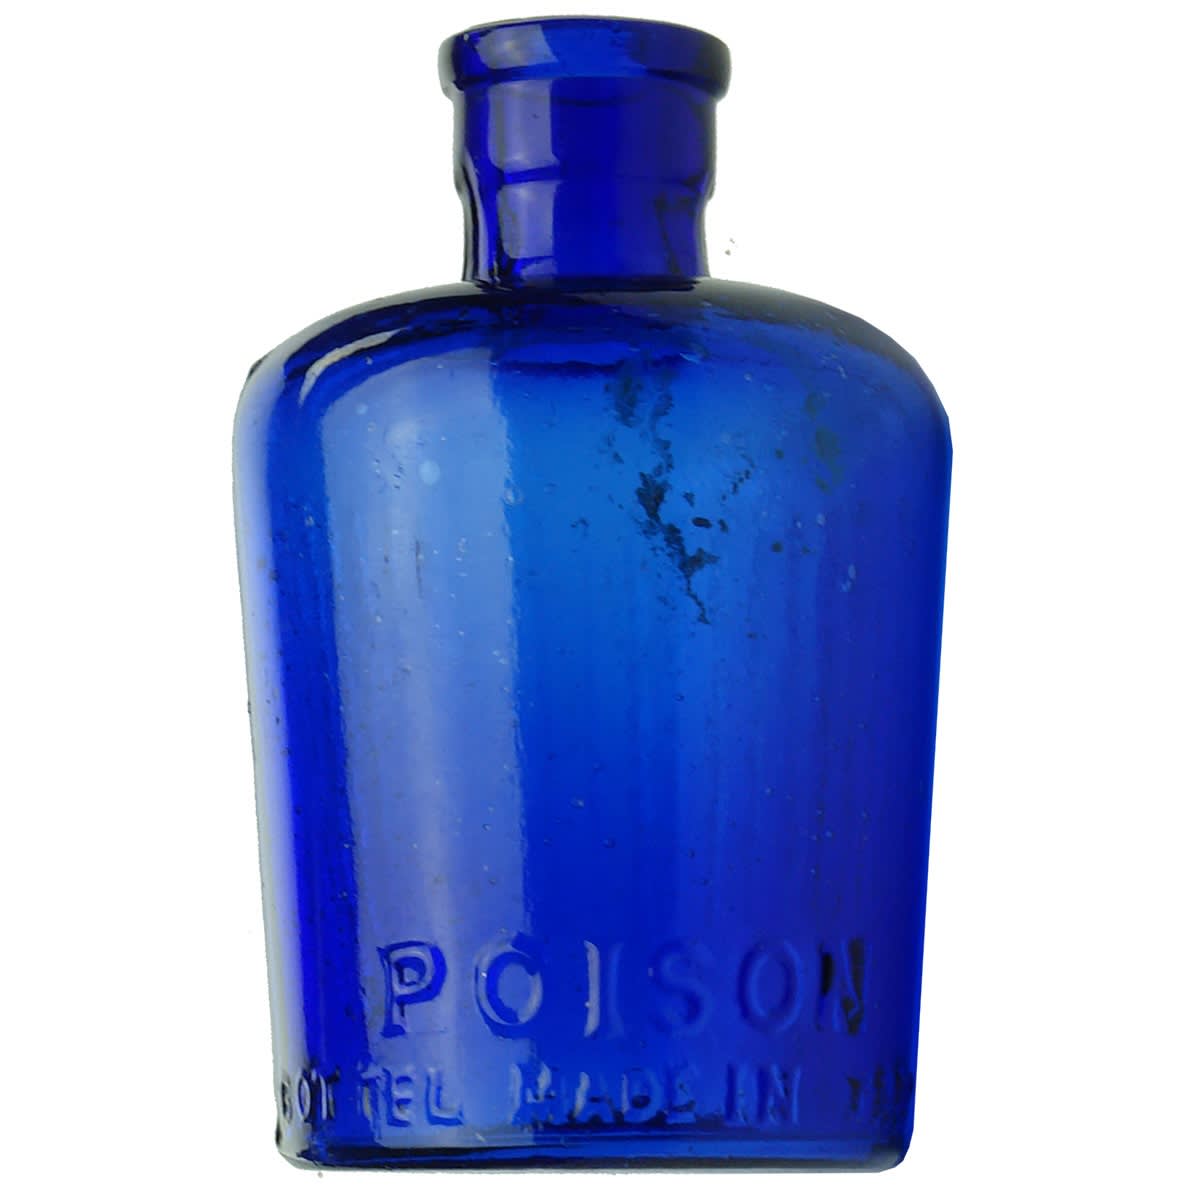 Lysol. 22 embossed lines down front, Poison, Bottel (sic) Made in Japan to rear. Cobalt. 4 oz.